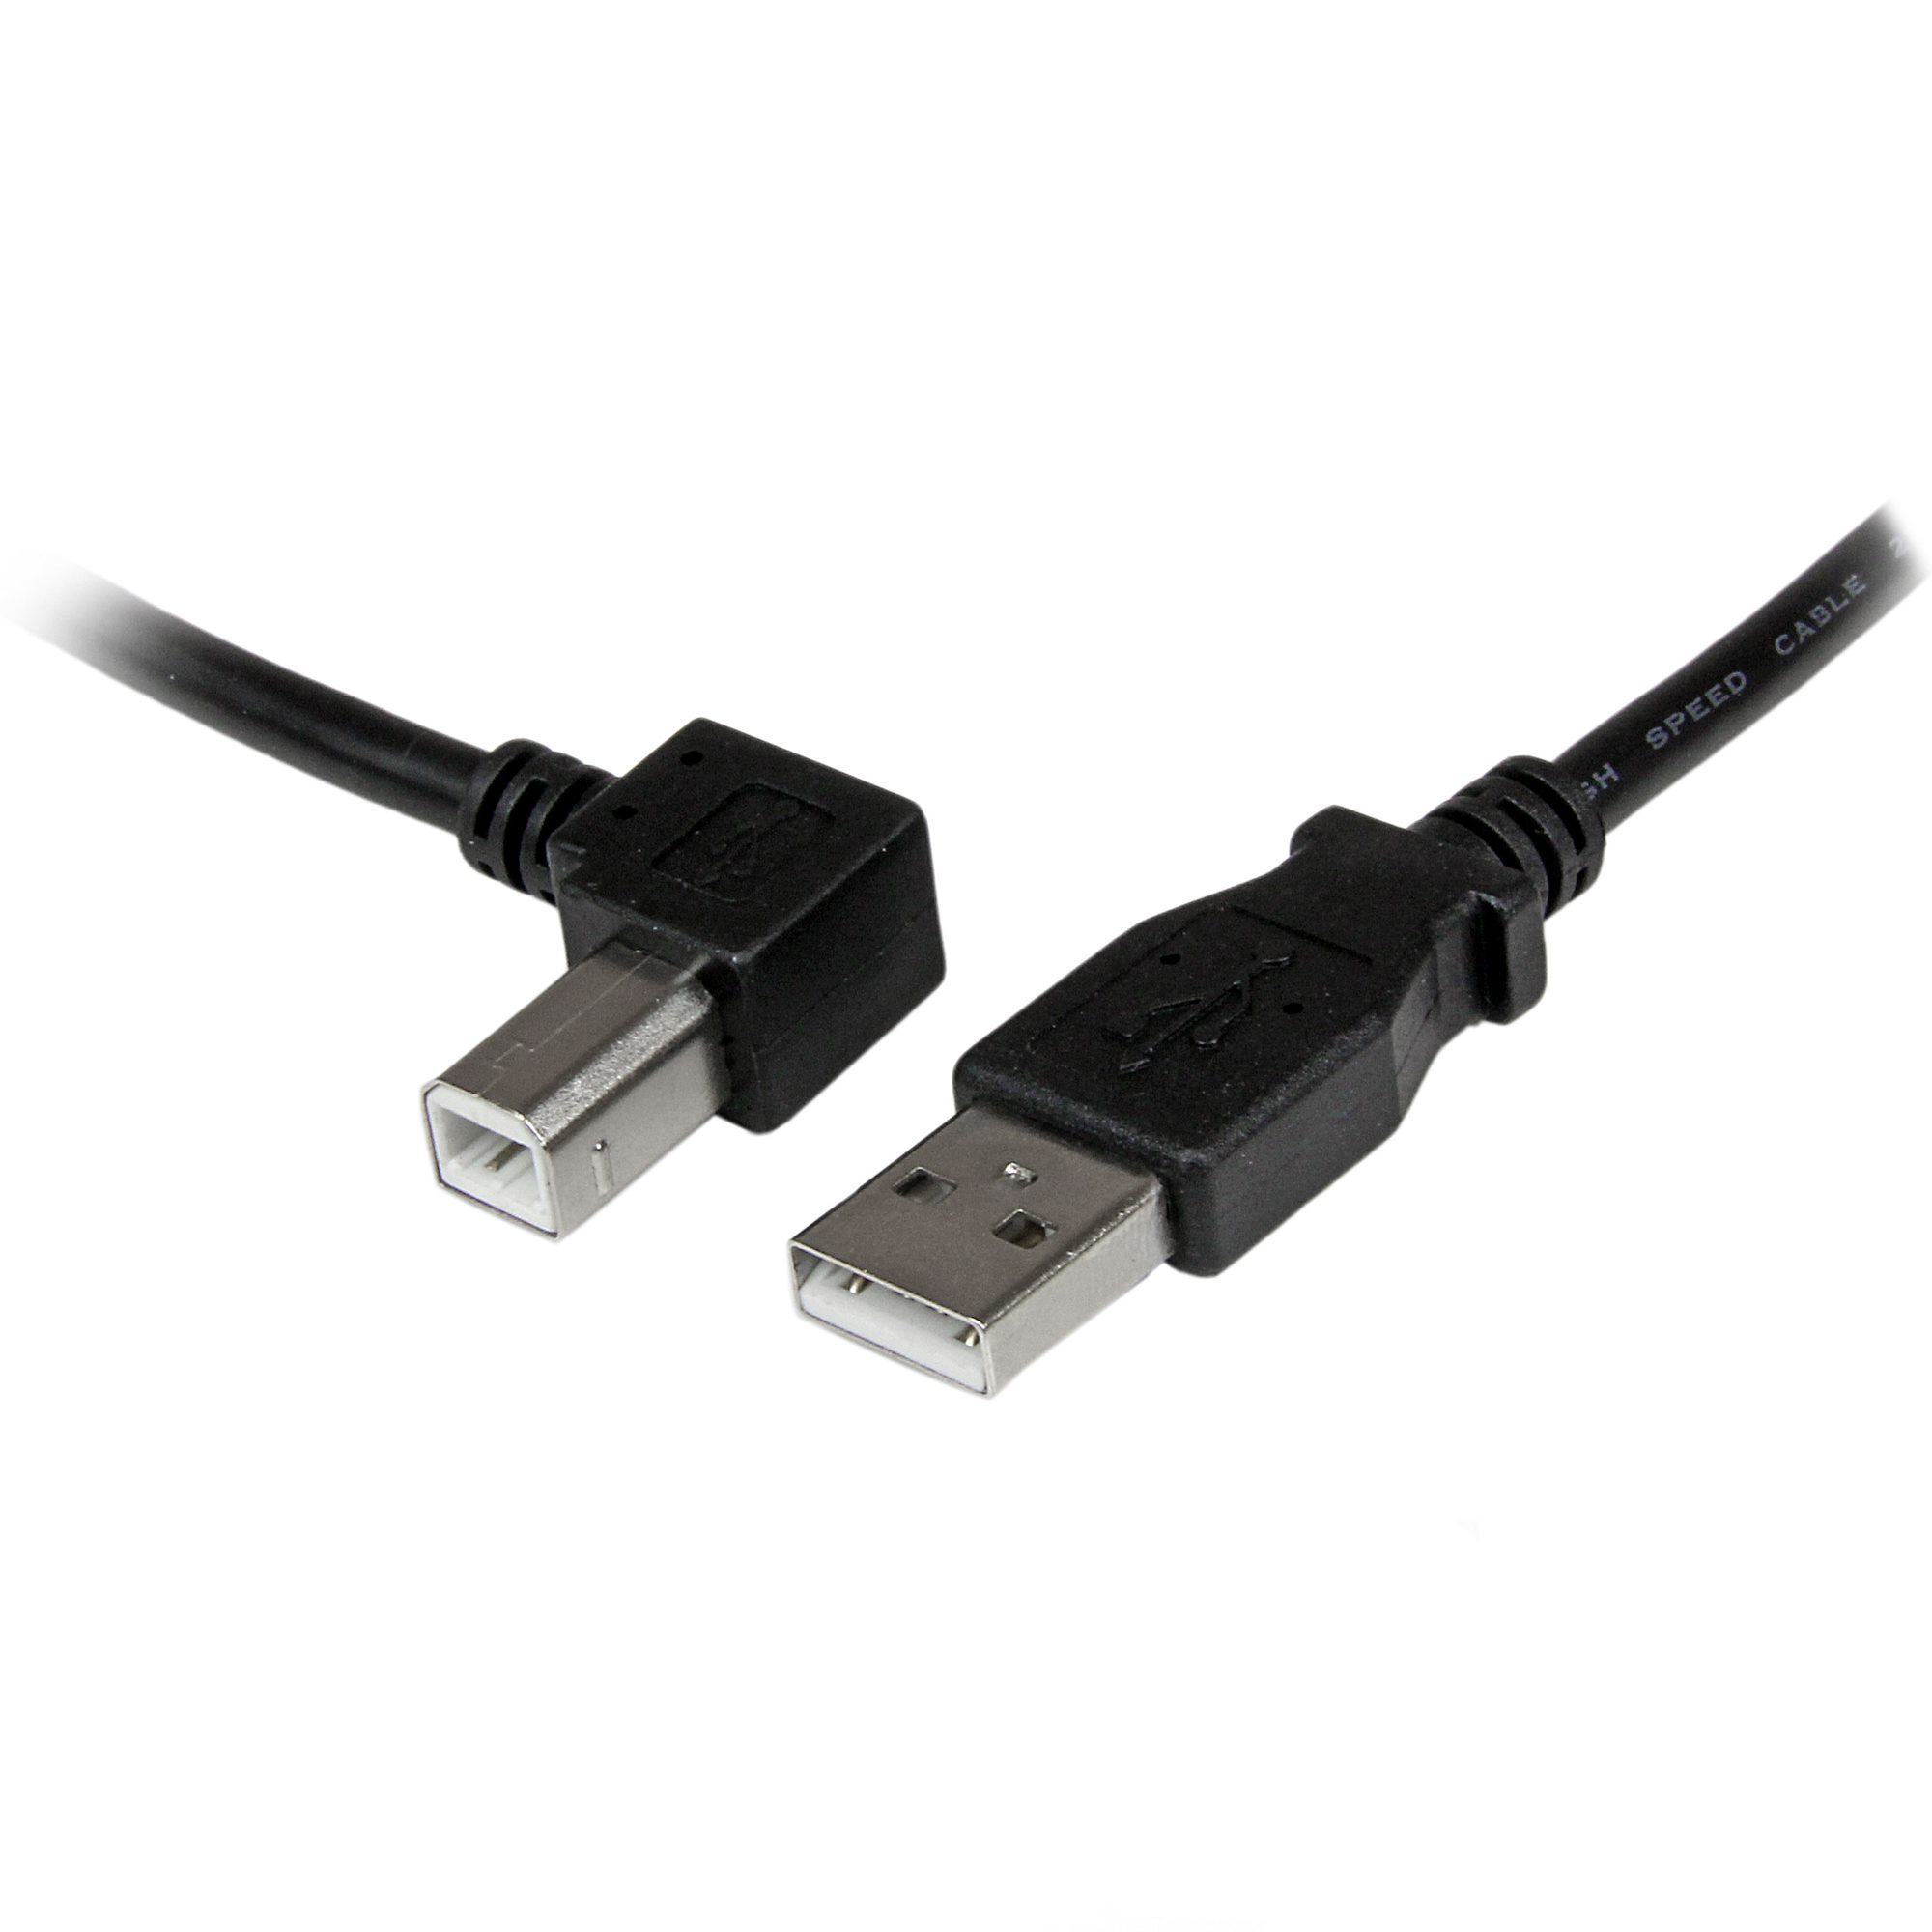 3m USB 2.0 A to Left Angle B Cable M/M - USB 2.0 Cables, Cables